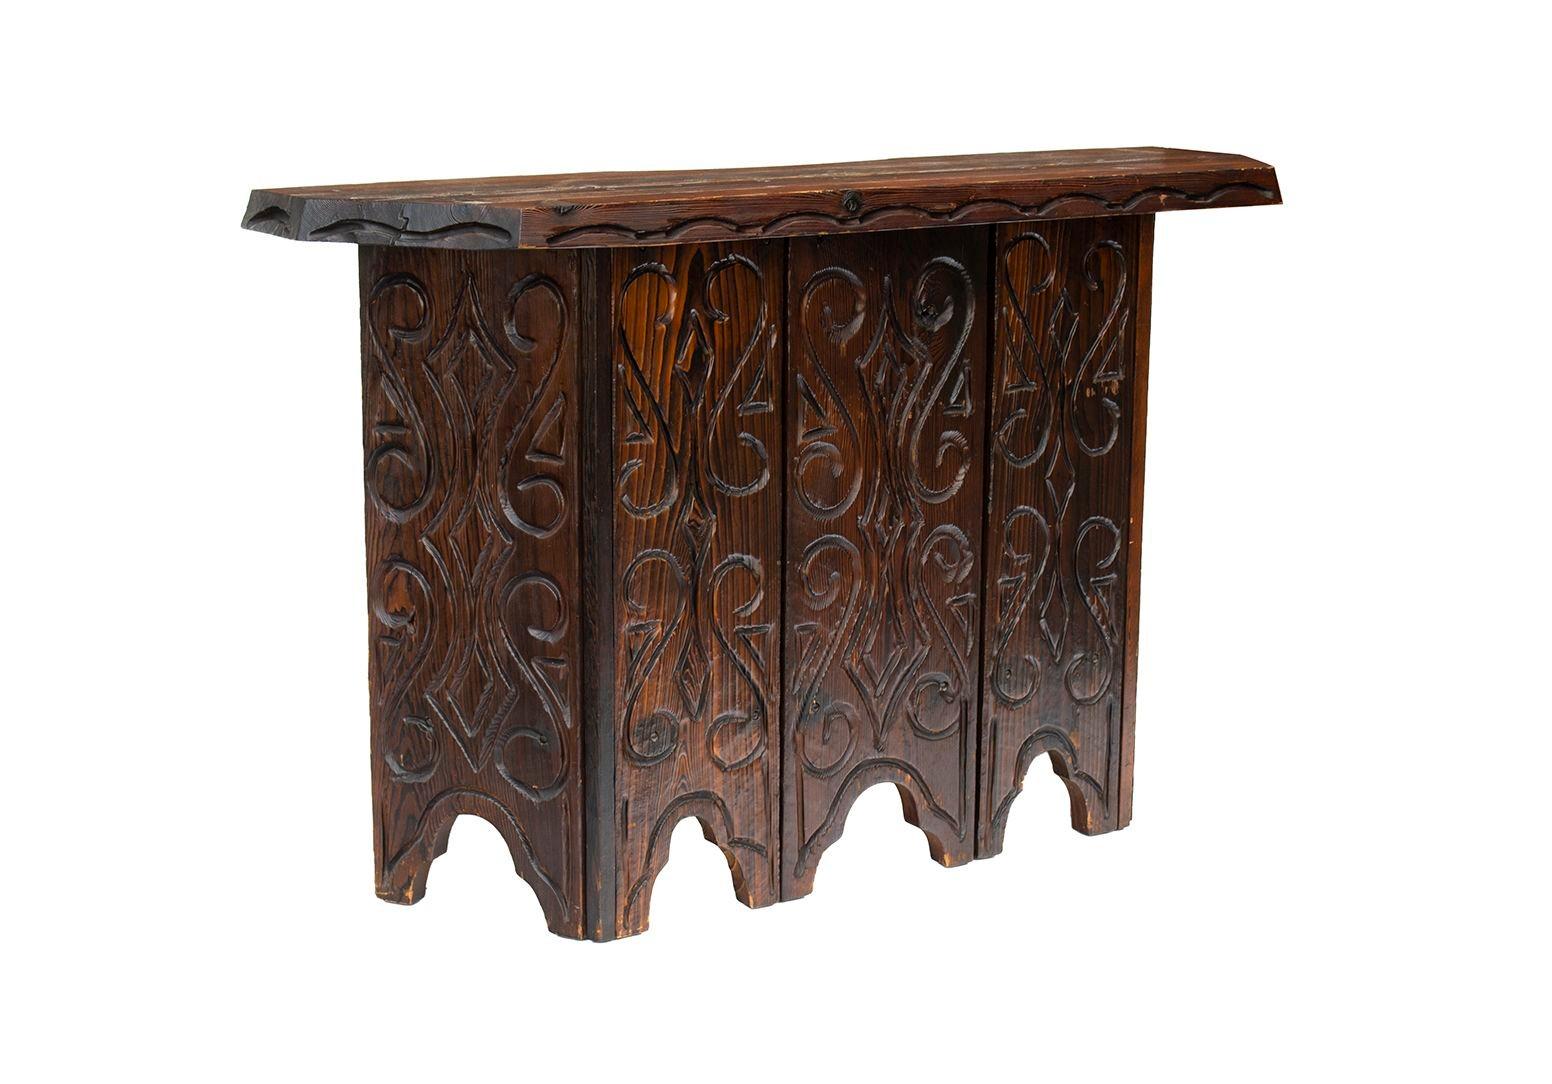 USA, 1960s
Hacienda bar in by William Westenhaver for Witco. The carved wooden bar has two shelves for storage to the back. It has great Spanish flavor in carved solid wood. Great detail to this piece. Spanish, tiki style, plenty of character.